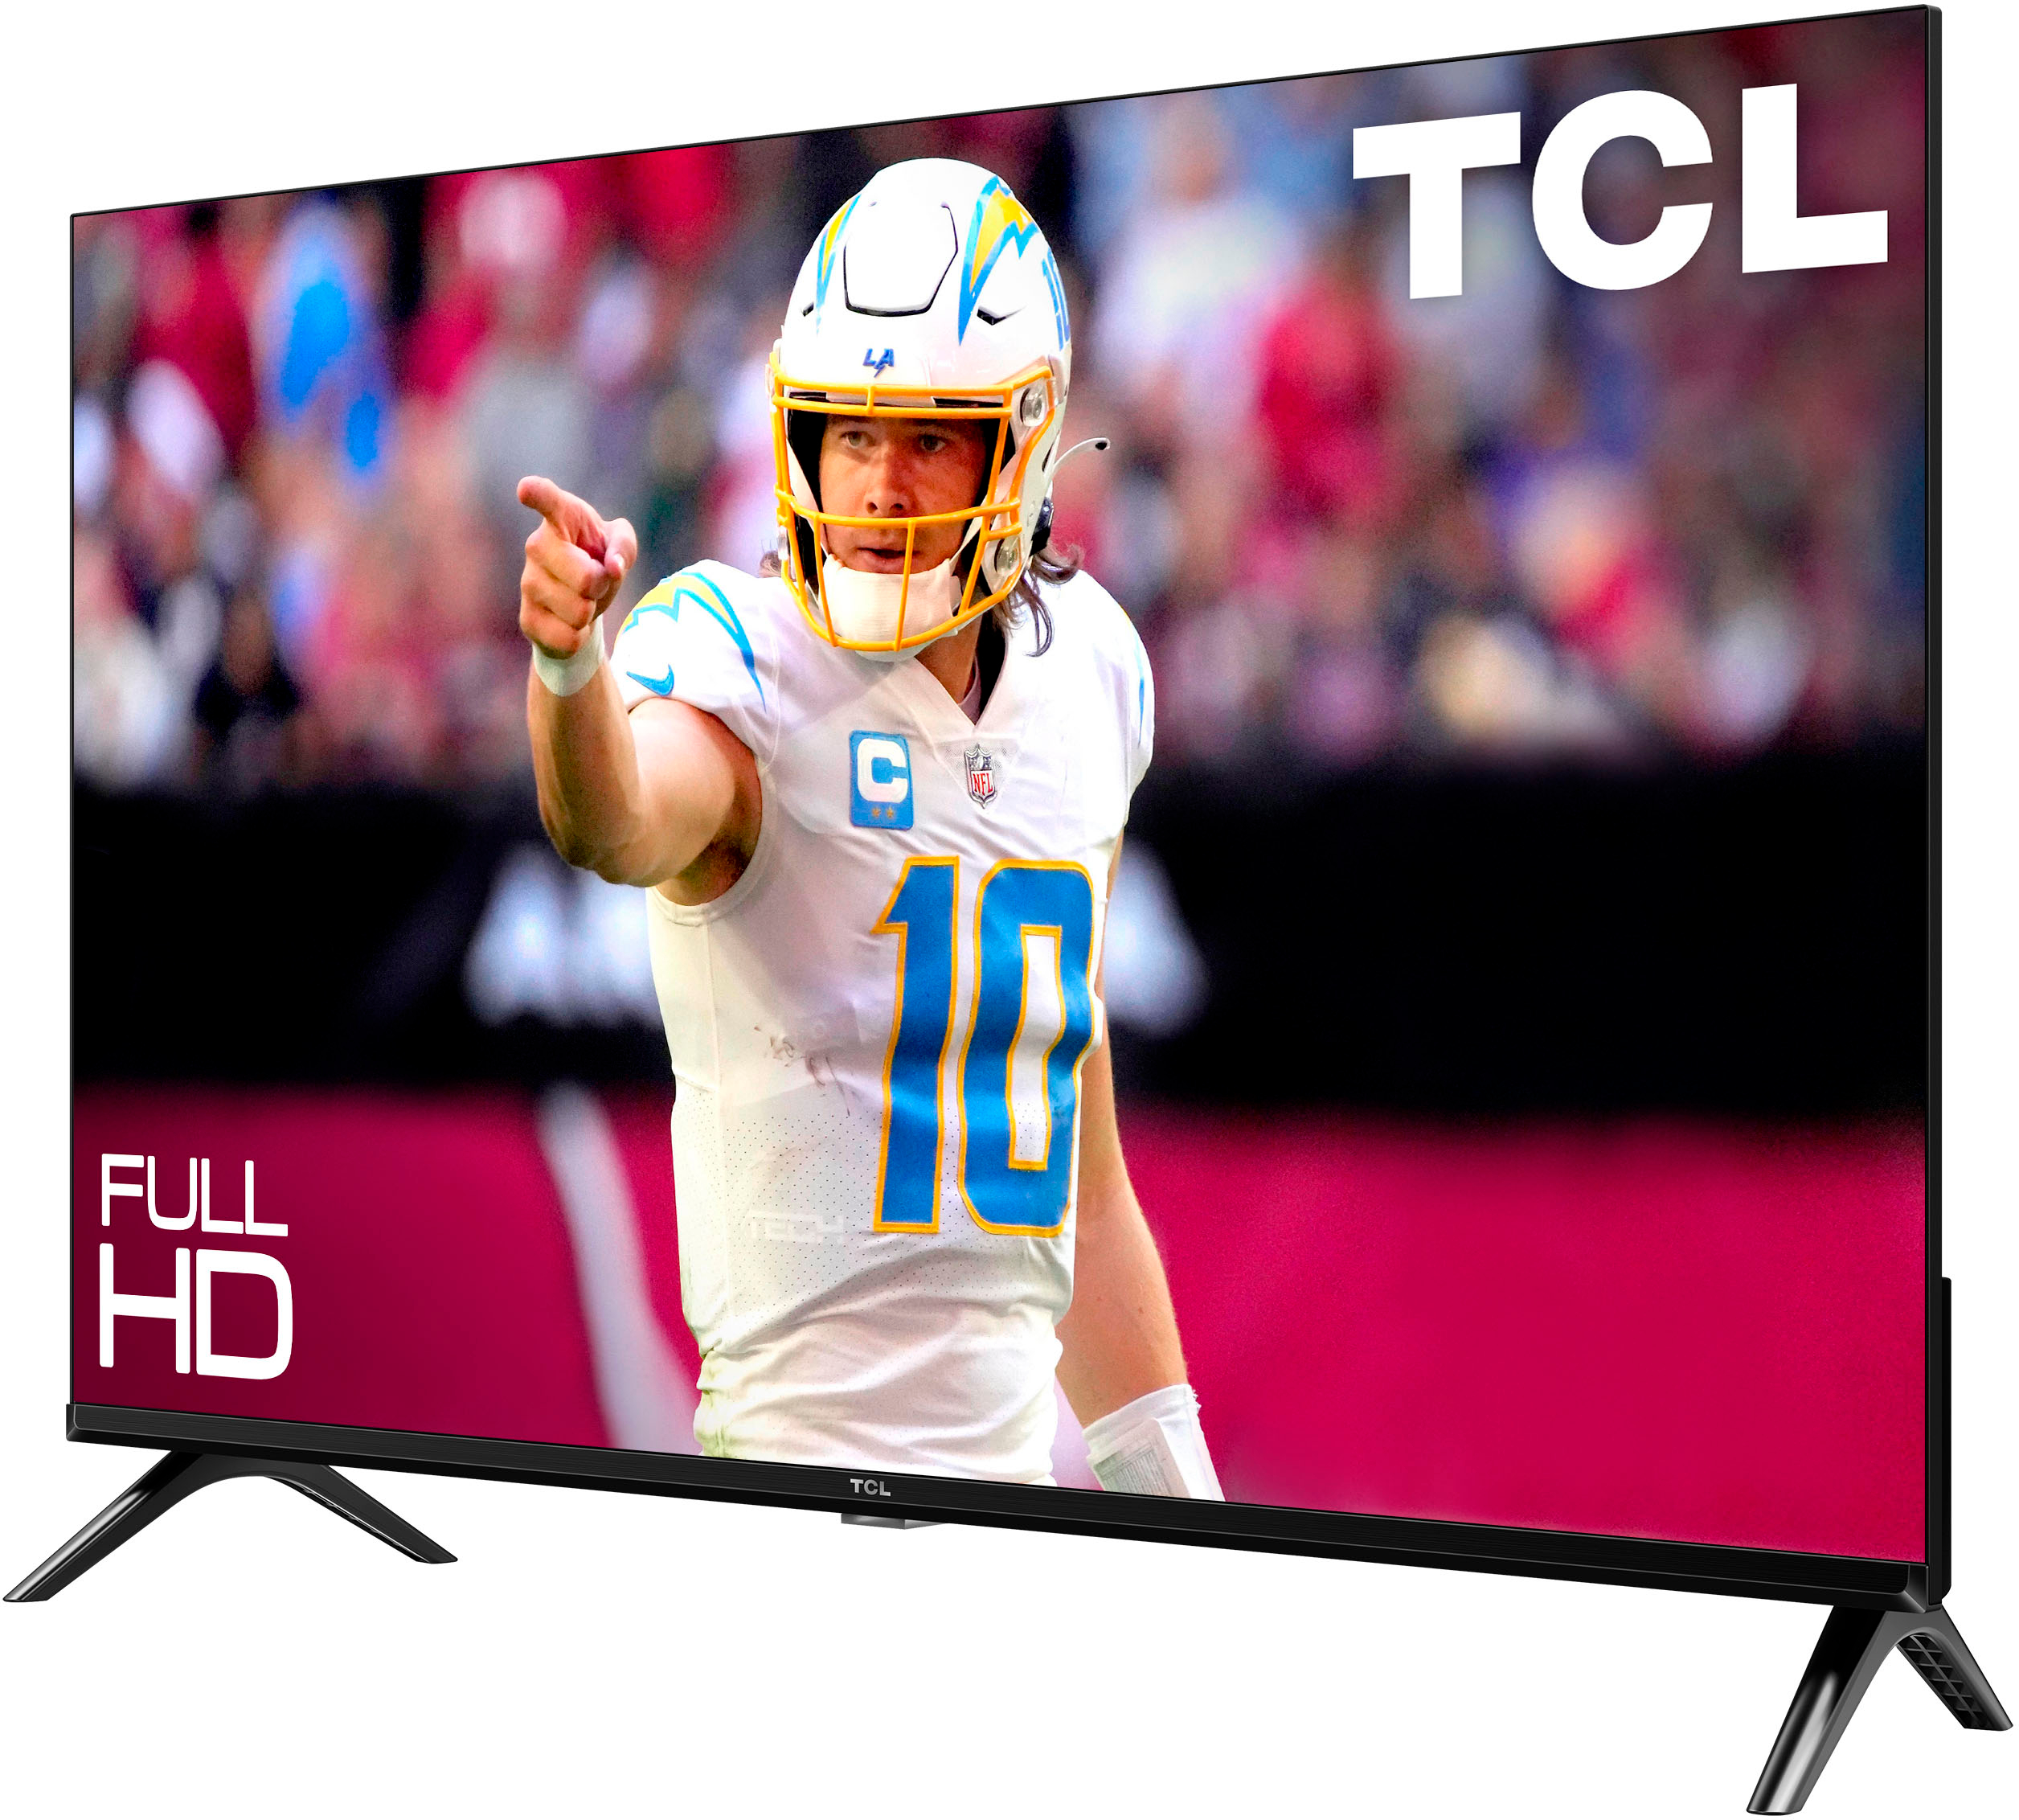 Left View: TCL - 40" Class S3 S-Class LED Full HD Smart TV with Google TV